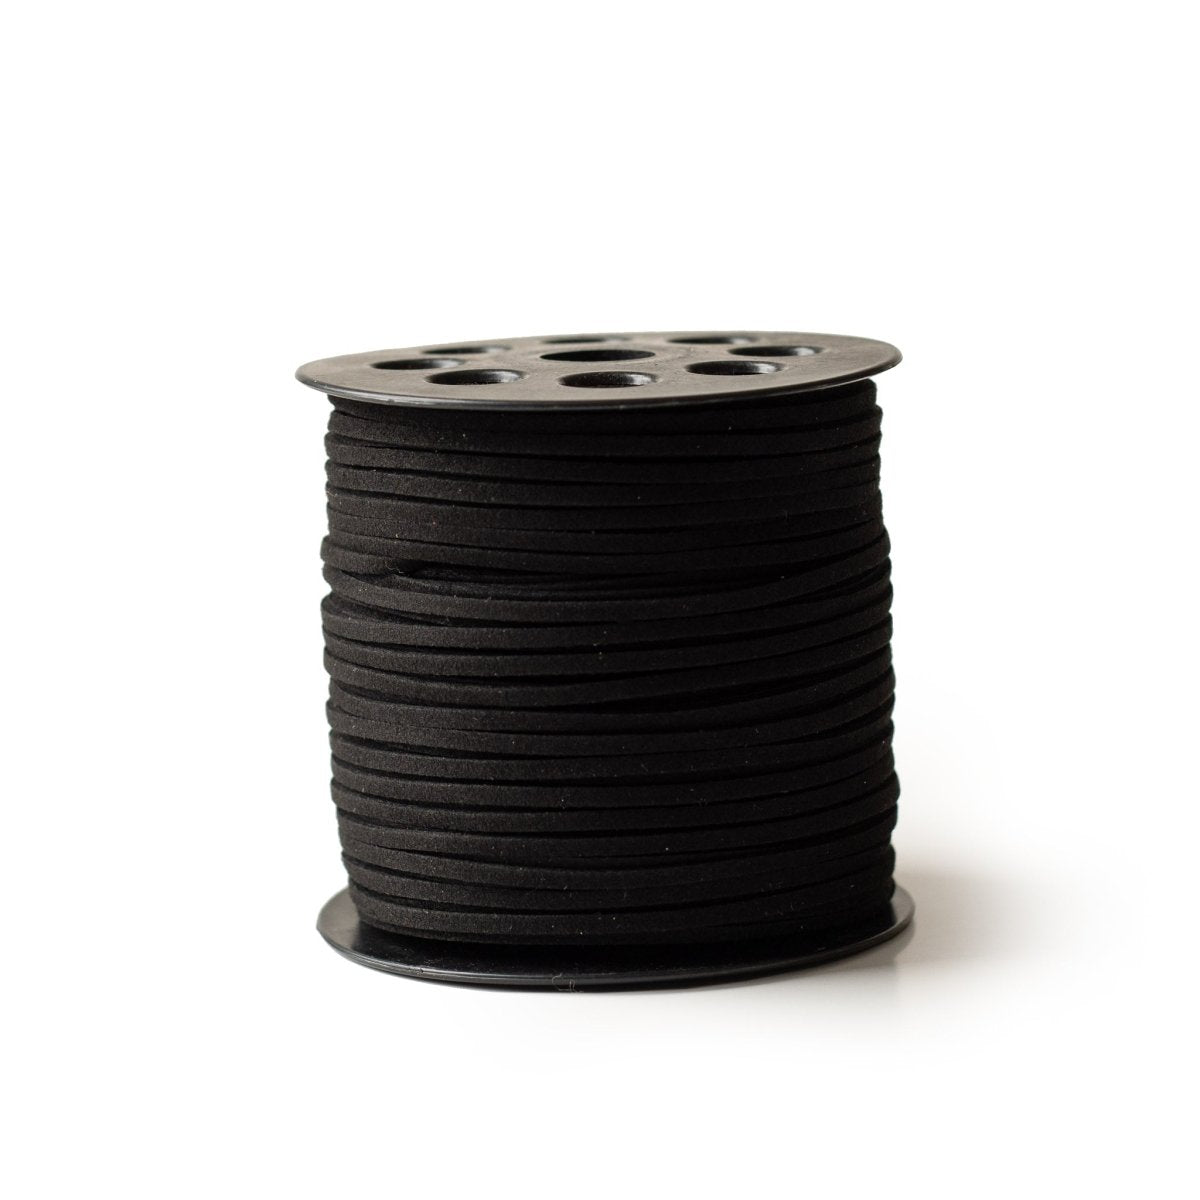 Cording Suede Leather Cord Black from Cara & Co Craft Supply